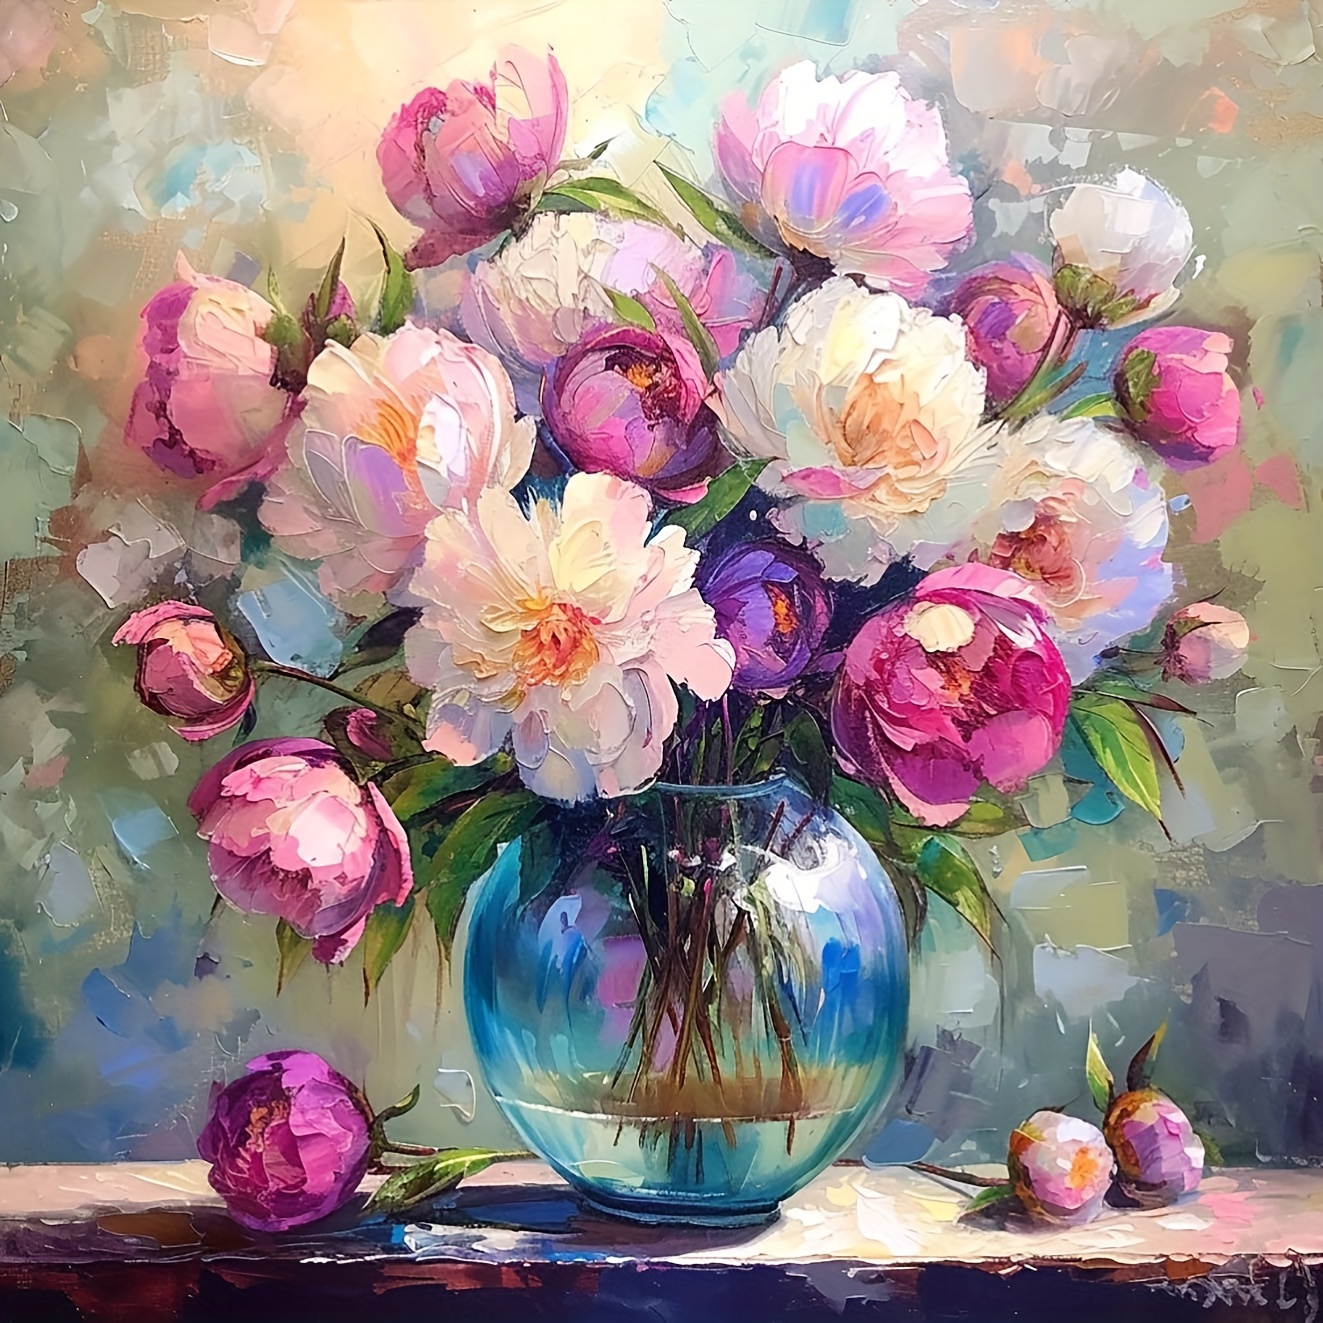 

1pc Large Size 40x40cm/15.7x15.7in Without Frame Diy 5d Artificial Diamond Art Painting Beautiful Flowers, Full Rhinestone Painting, Diamond Art Embroidery Kits, Handmade Home Room Office Wall Decor